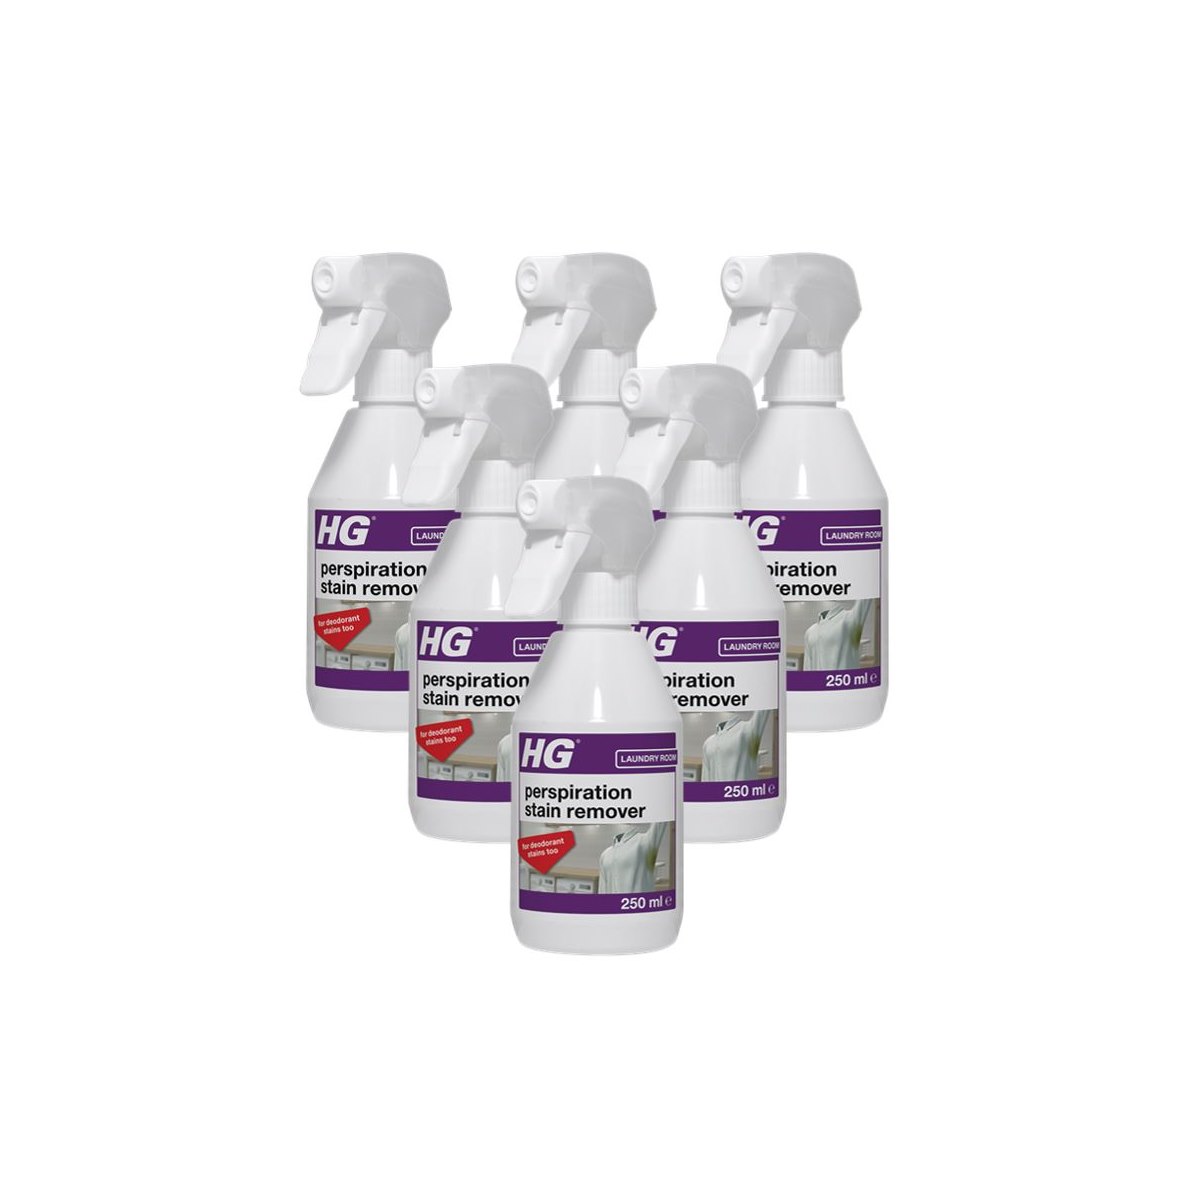 Case of 6 x HG Perspiration and Deodorant Stain Remover Spray 250ml